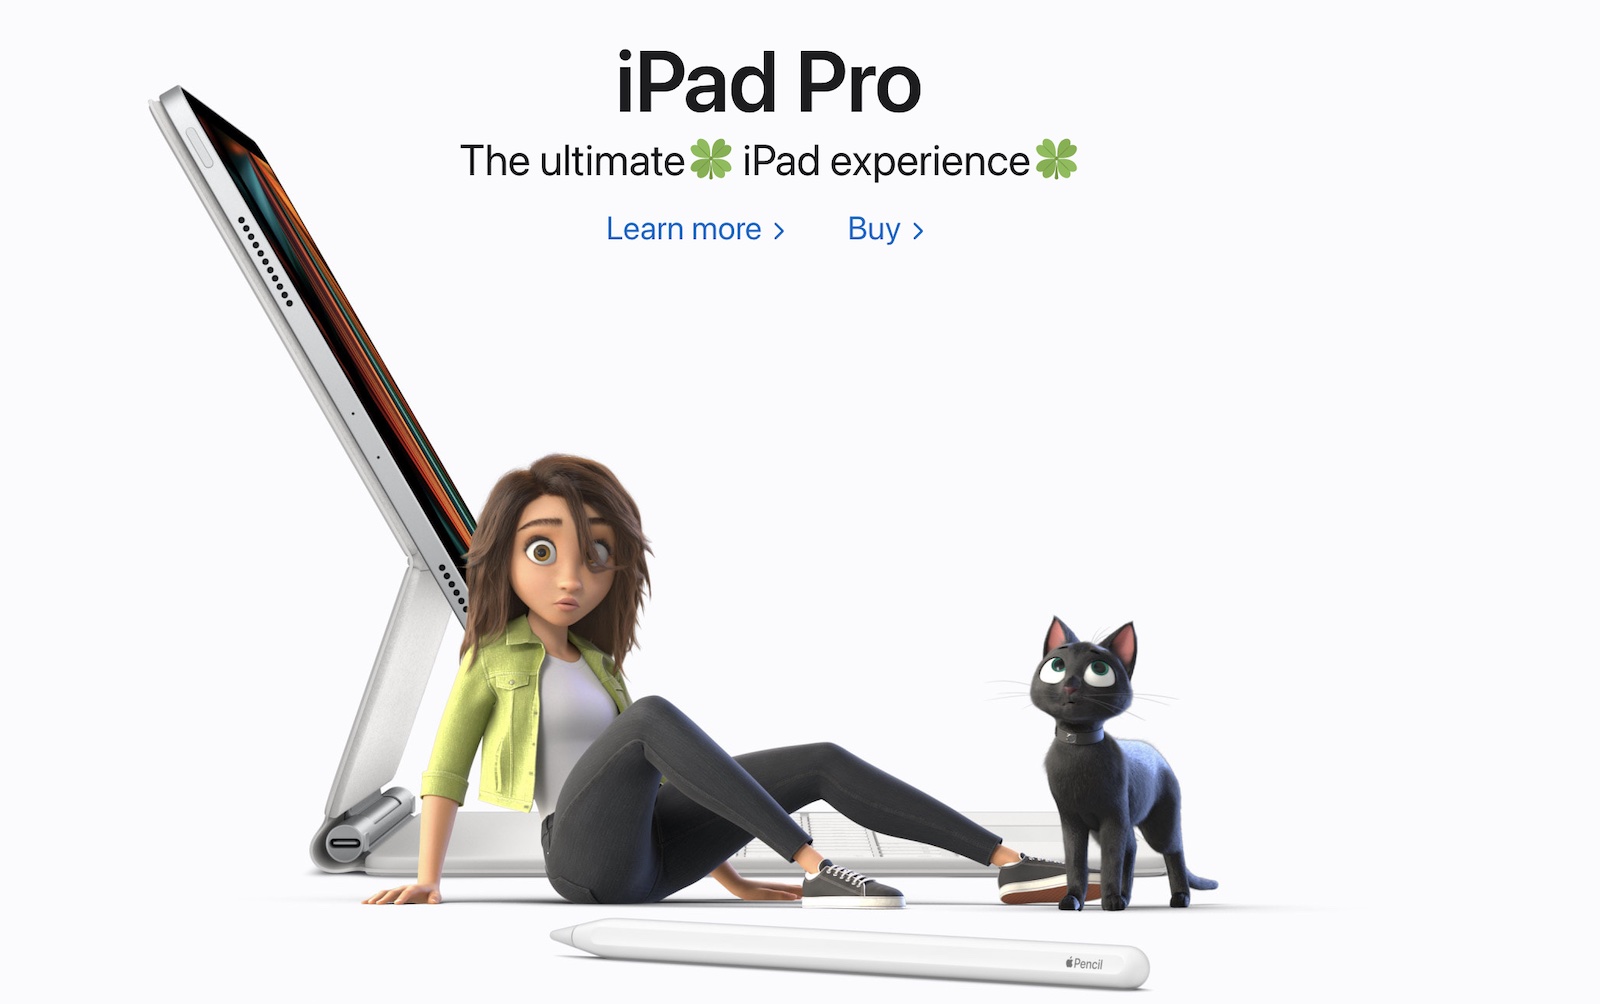 Apple TV+ Animated Film ‘Luck’ Now Streaming, Takes Over Apple’s Homepage